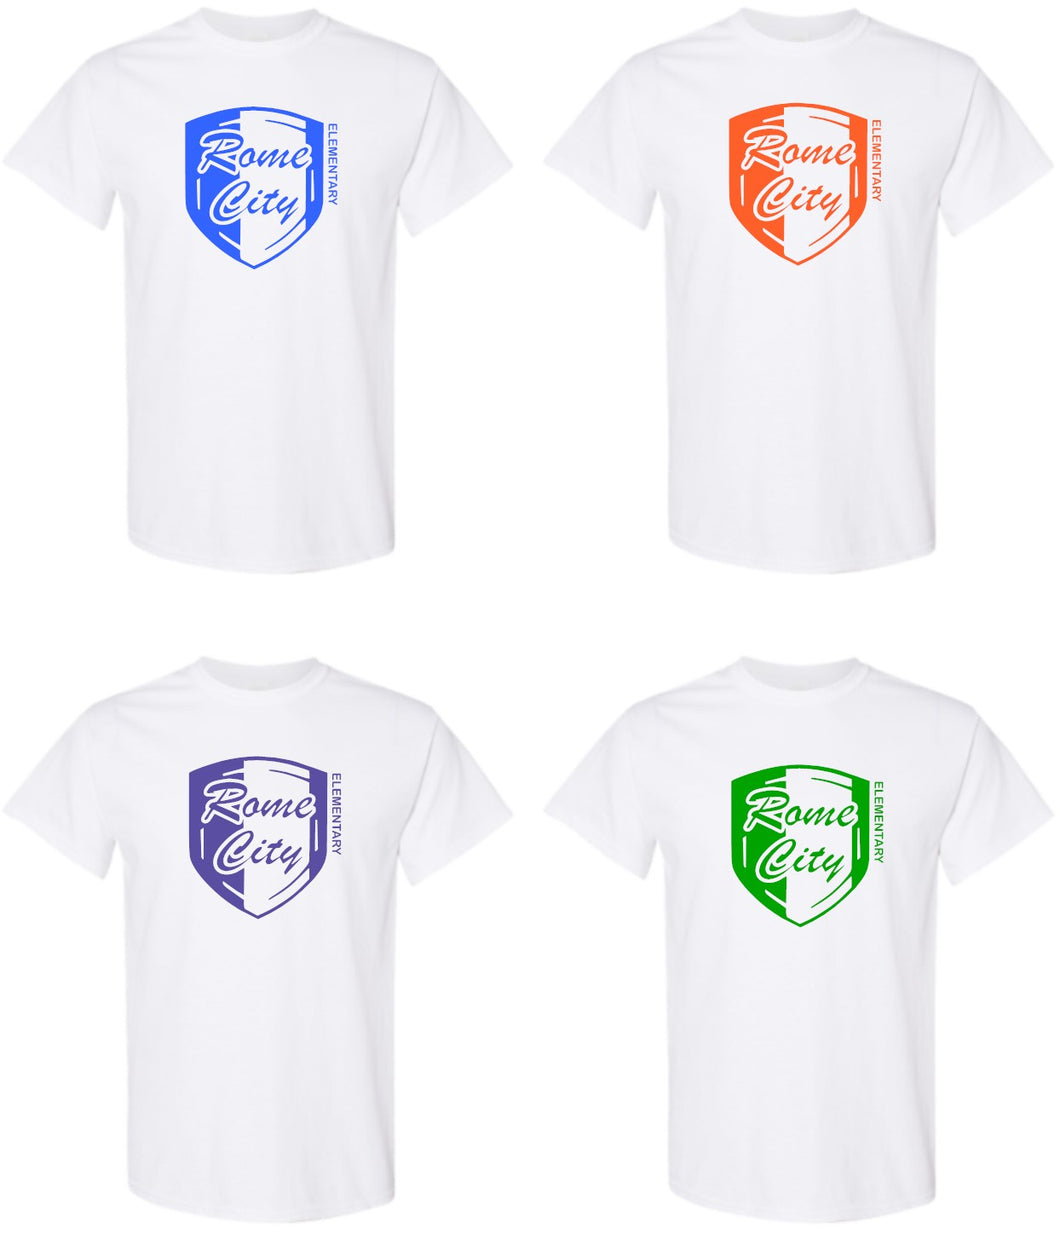 RC T-Shirt or Long Sleeve - White Shirt With Color Print